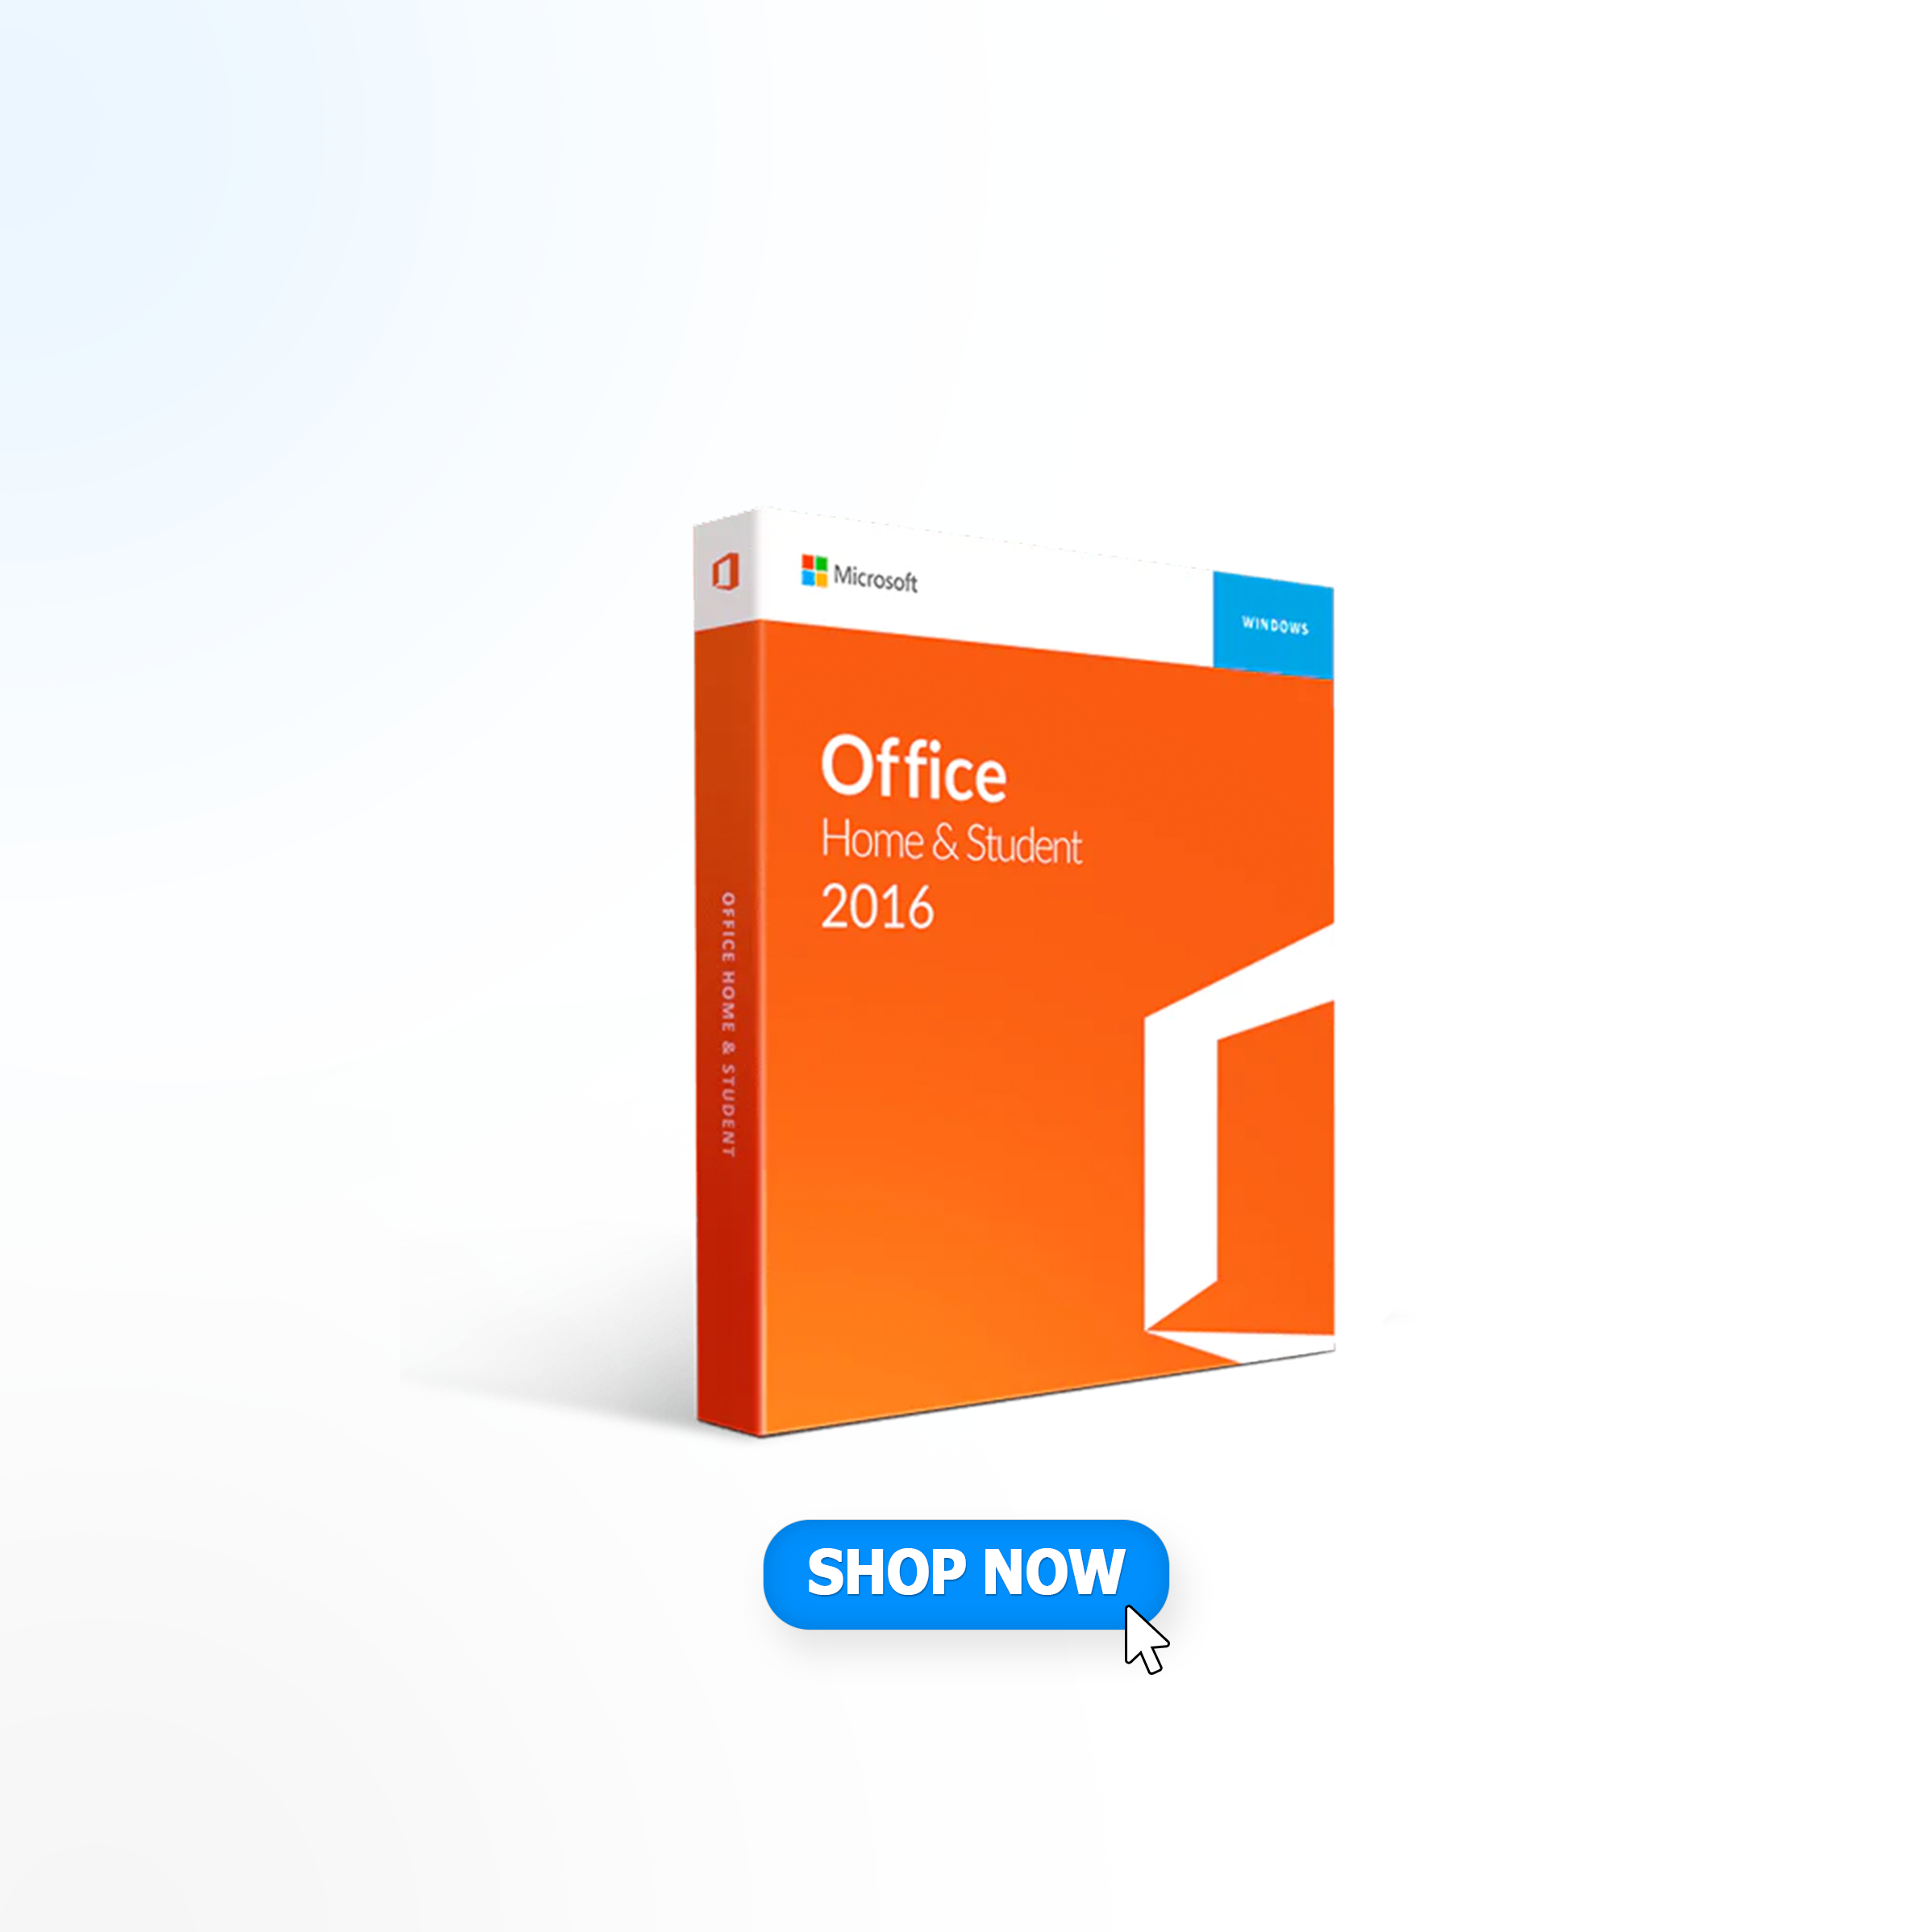 Looking to purchase Microsoft Office for Students? Now is the time!